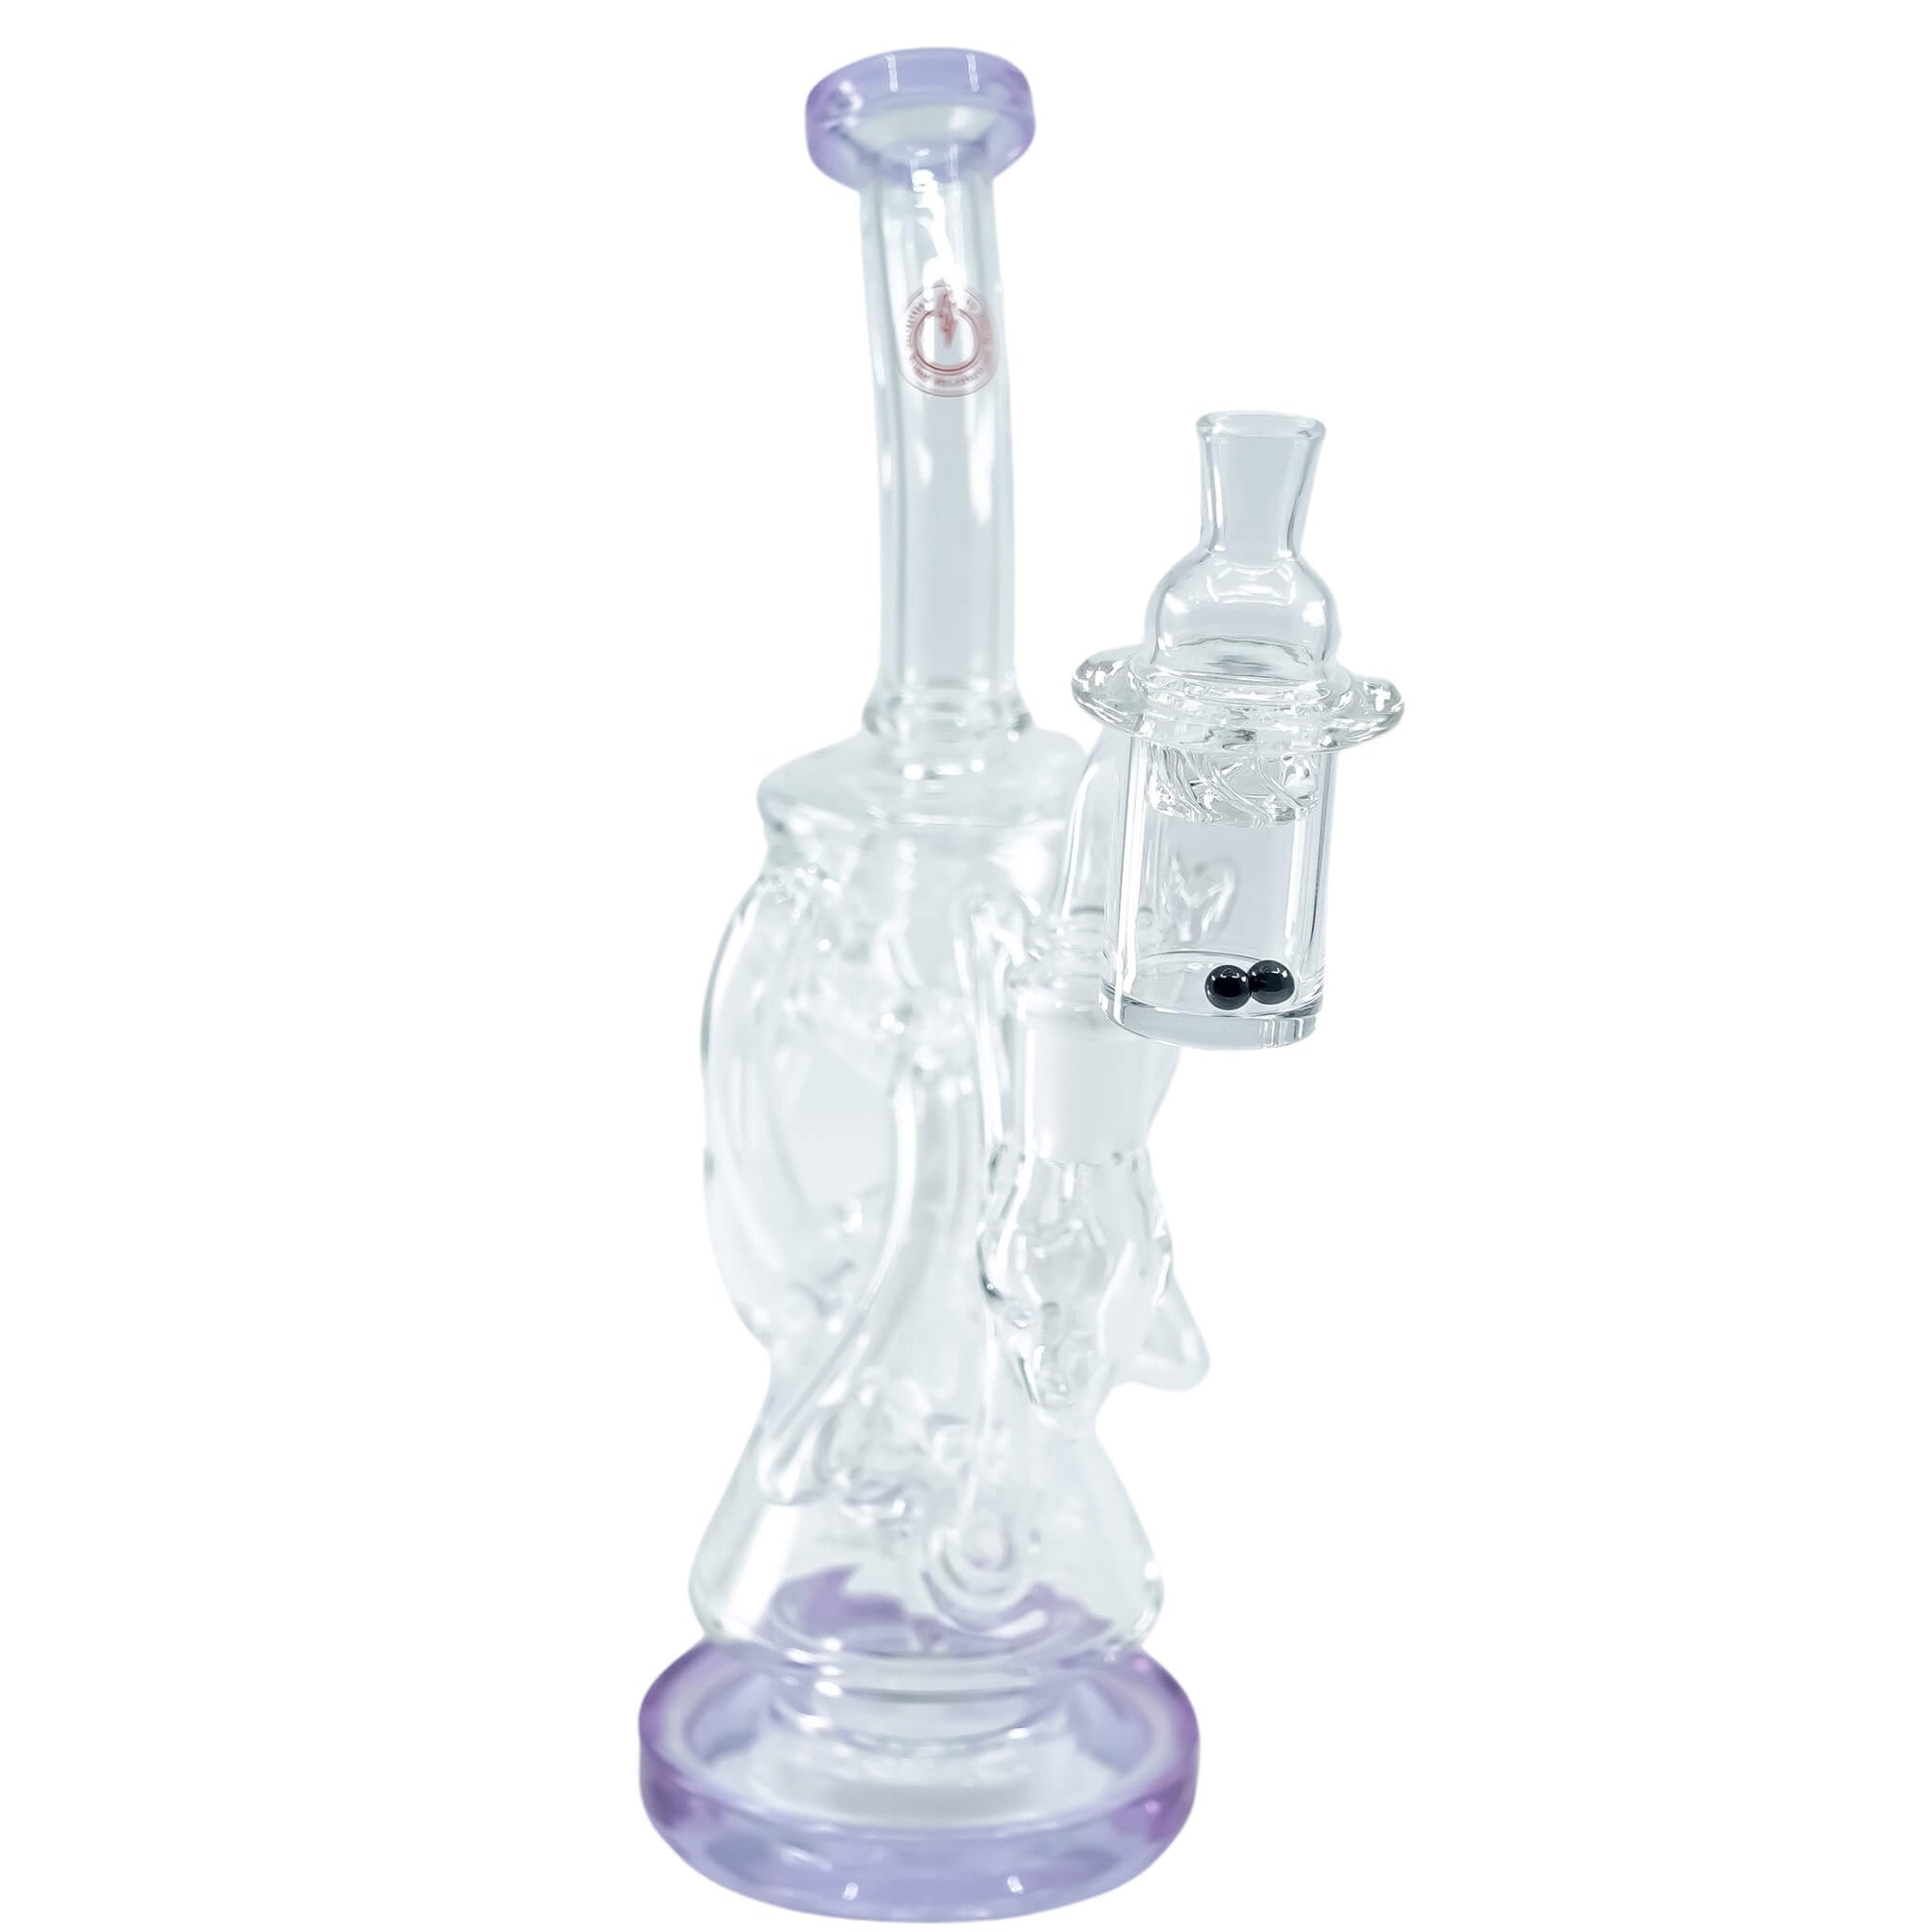 Trifecta 25mm Handmade Joint Complete Dabbing Kit #1 | Blue With SiC Angled View | TDS